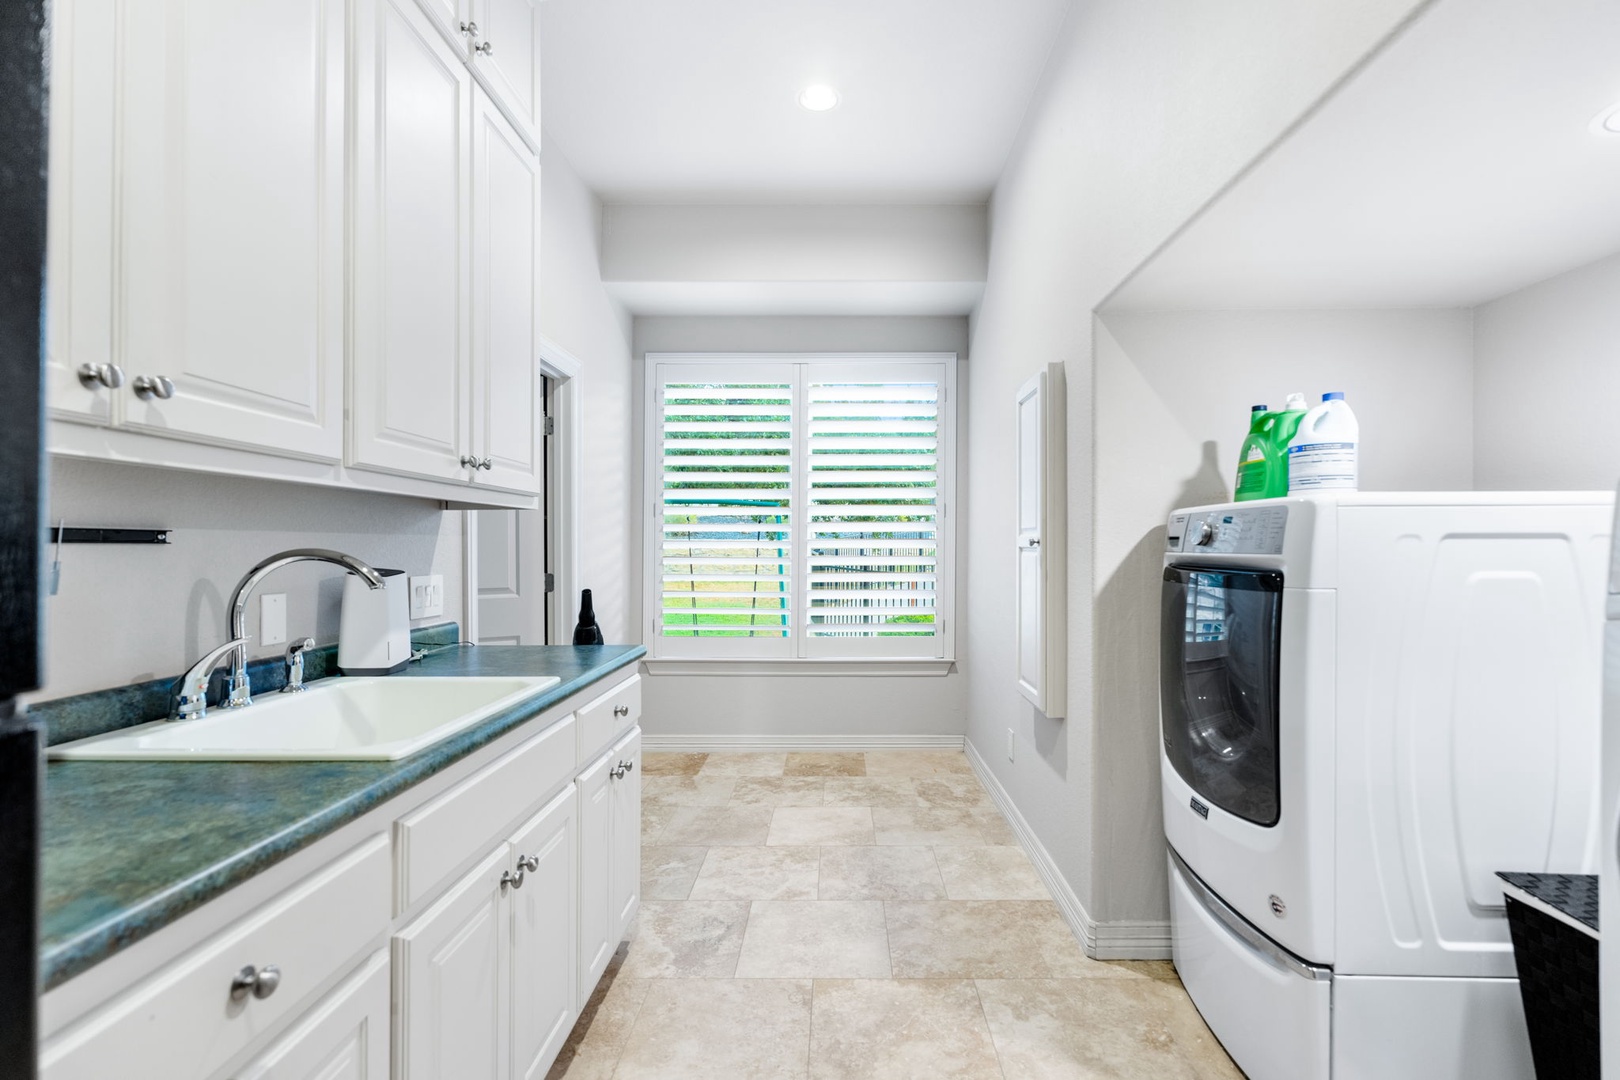 Private laundry is available for your stay, located on the 1st floor